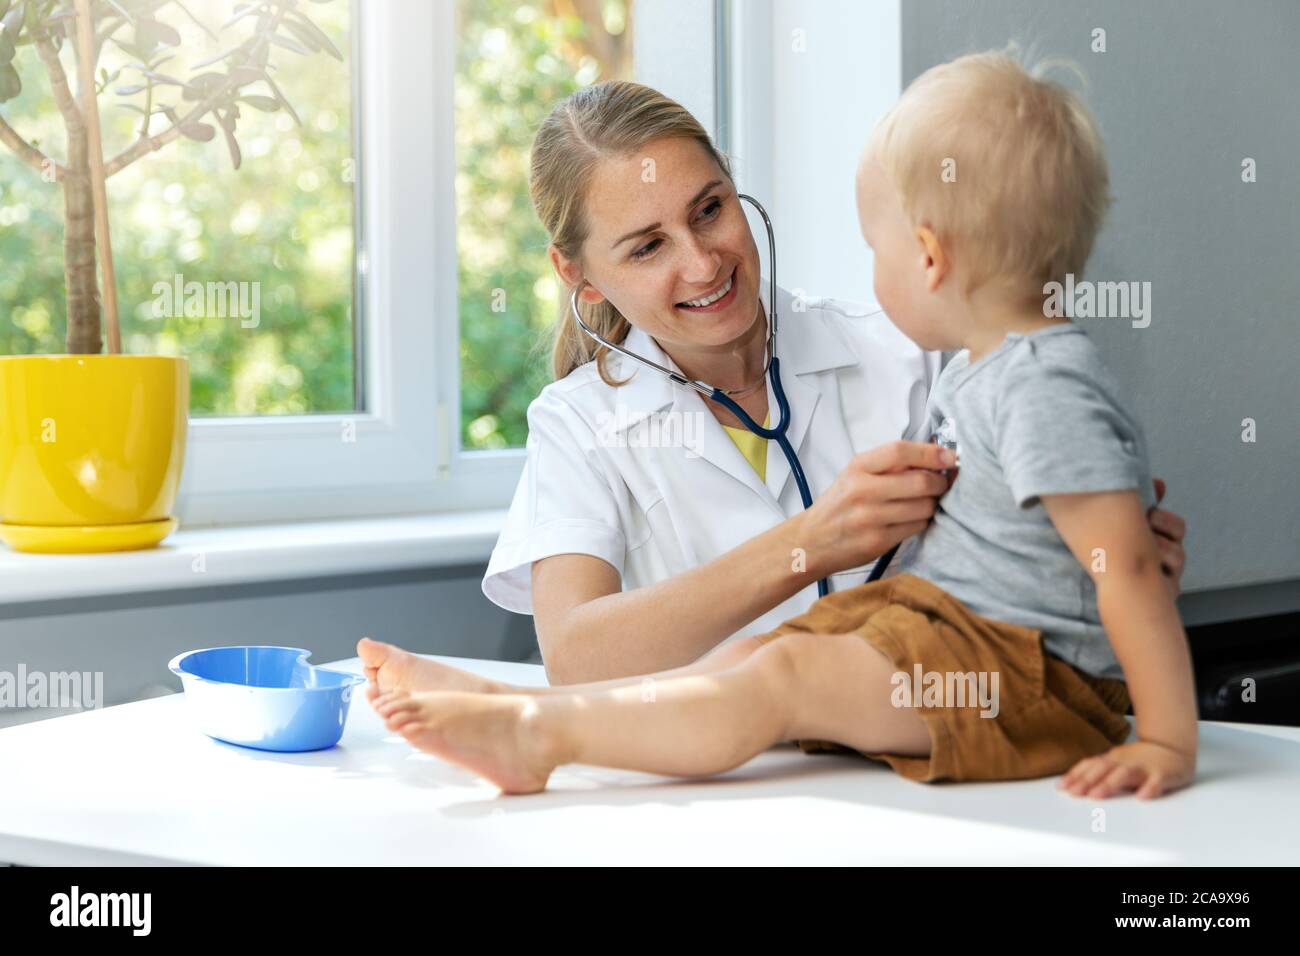 doctor examining a child patient by stethoscope in clinic office. little boy at pediatrician appointment Stock Photo